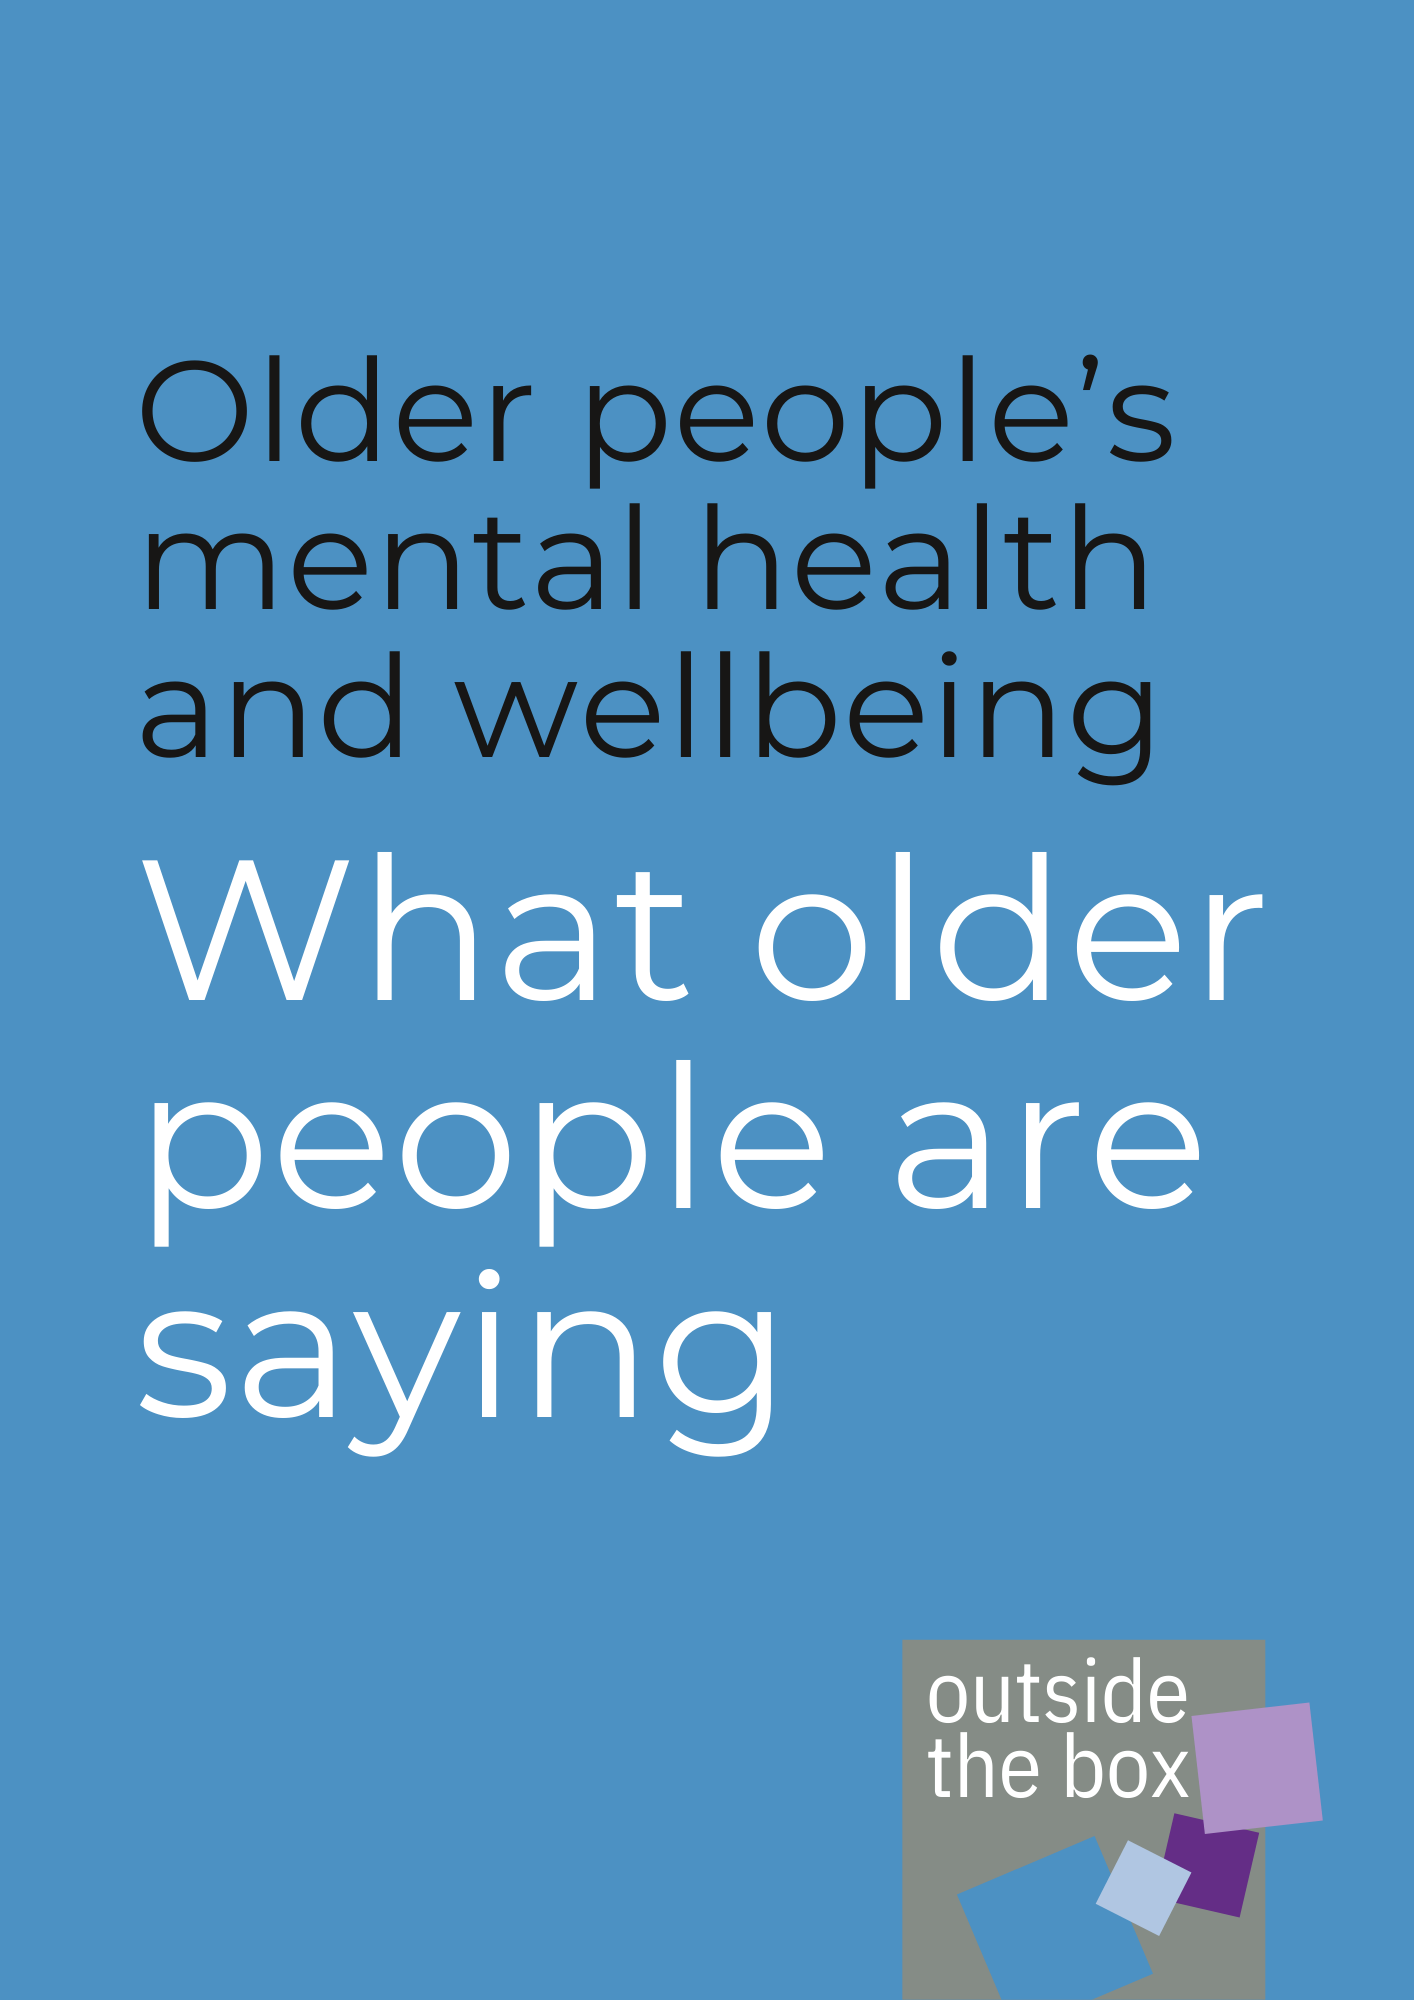 Older people's mental health and wellbeing - what older people are saying